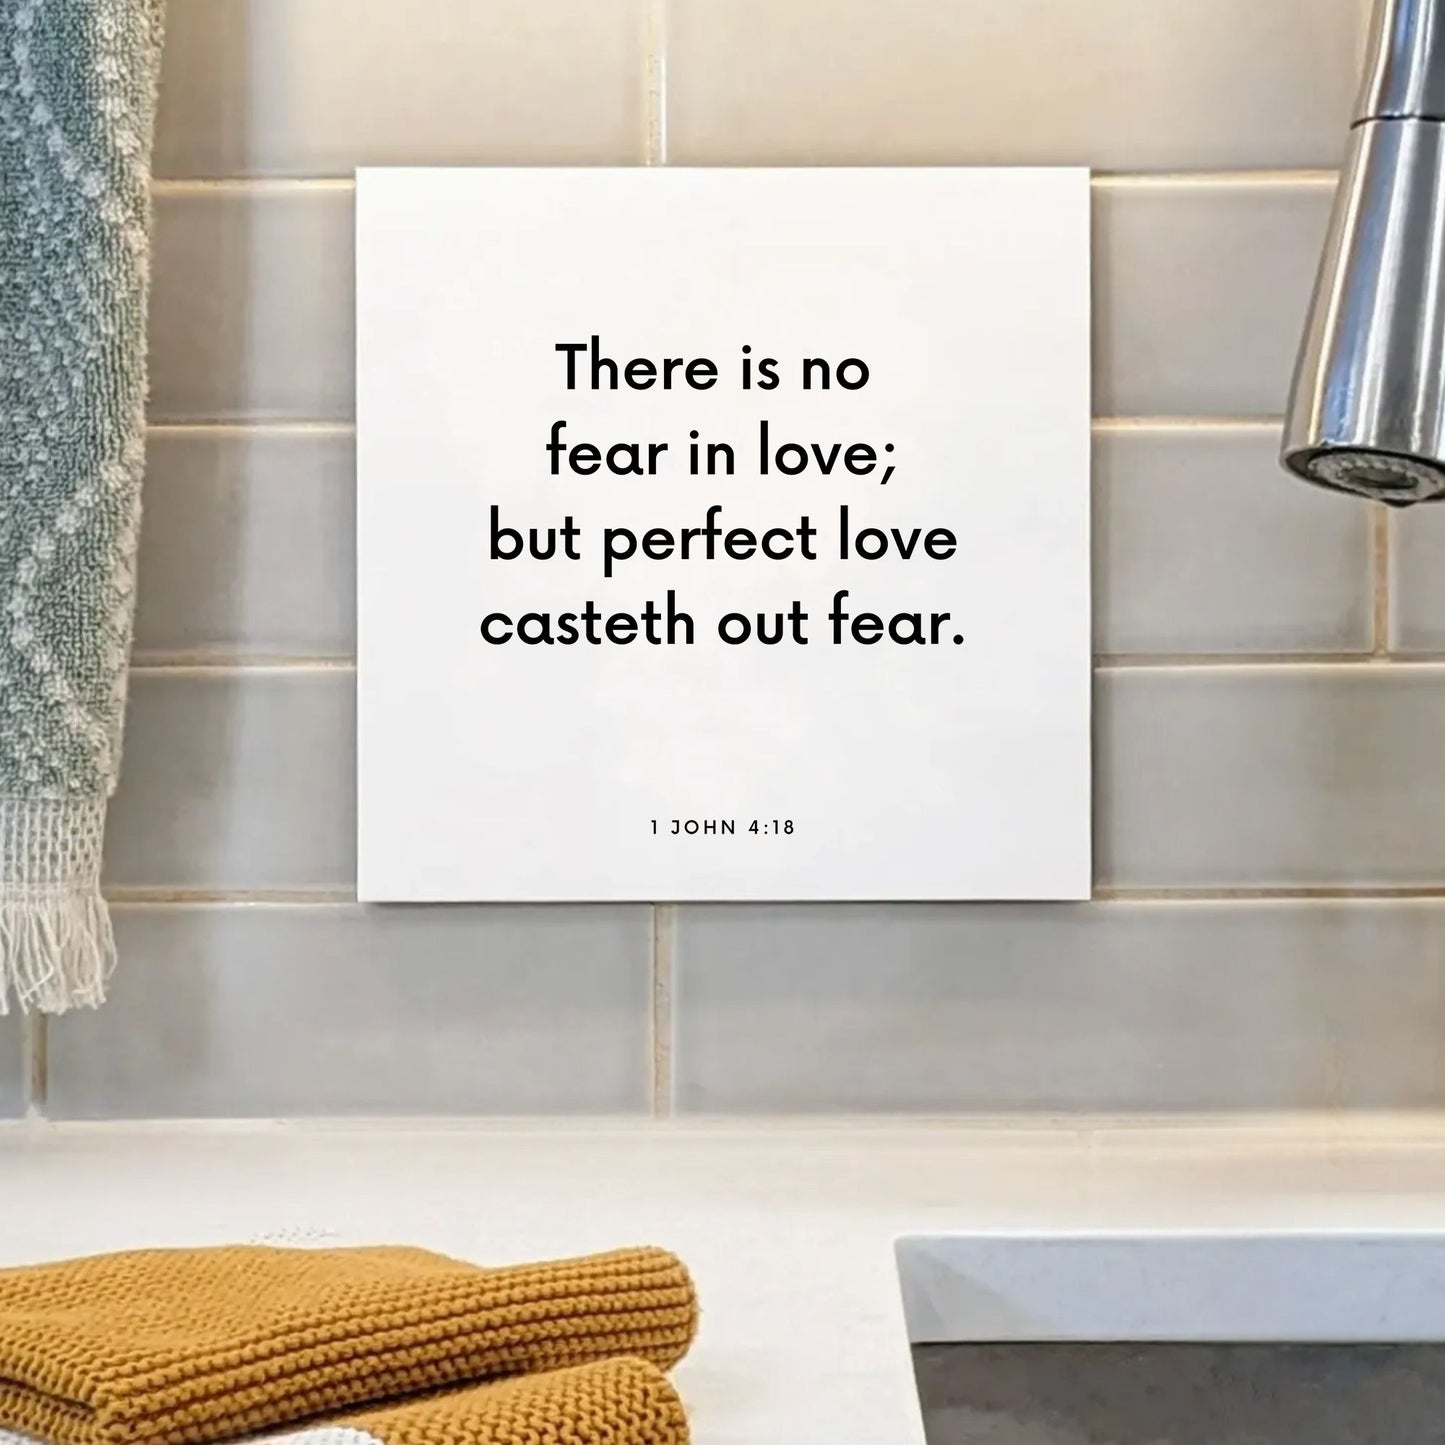 Sink mouting of the scripture tile for 1 John 4:18 - "There is no fear in love; but perfect love casteth out fear"